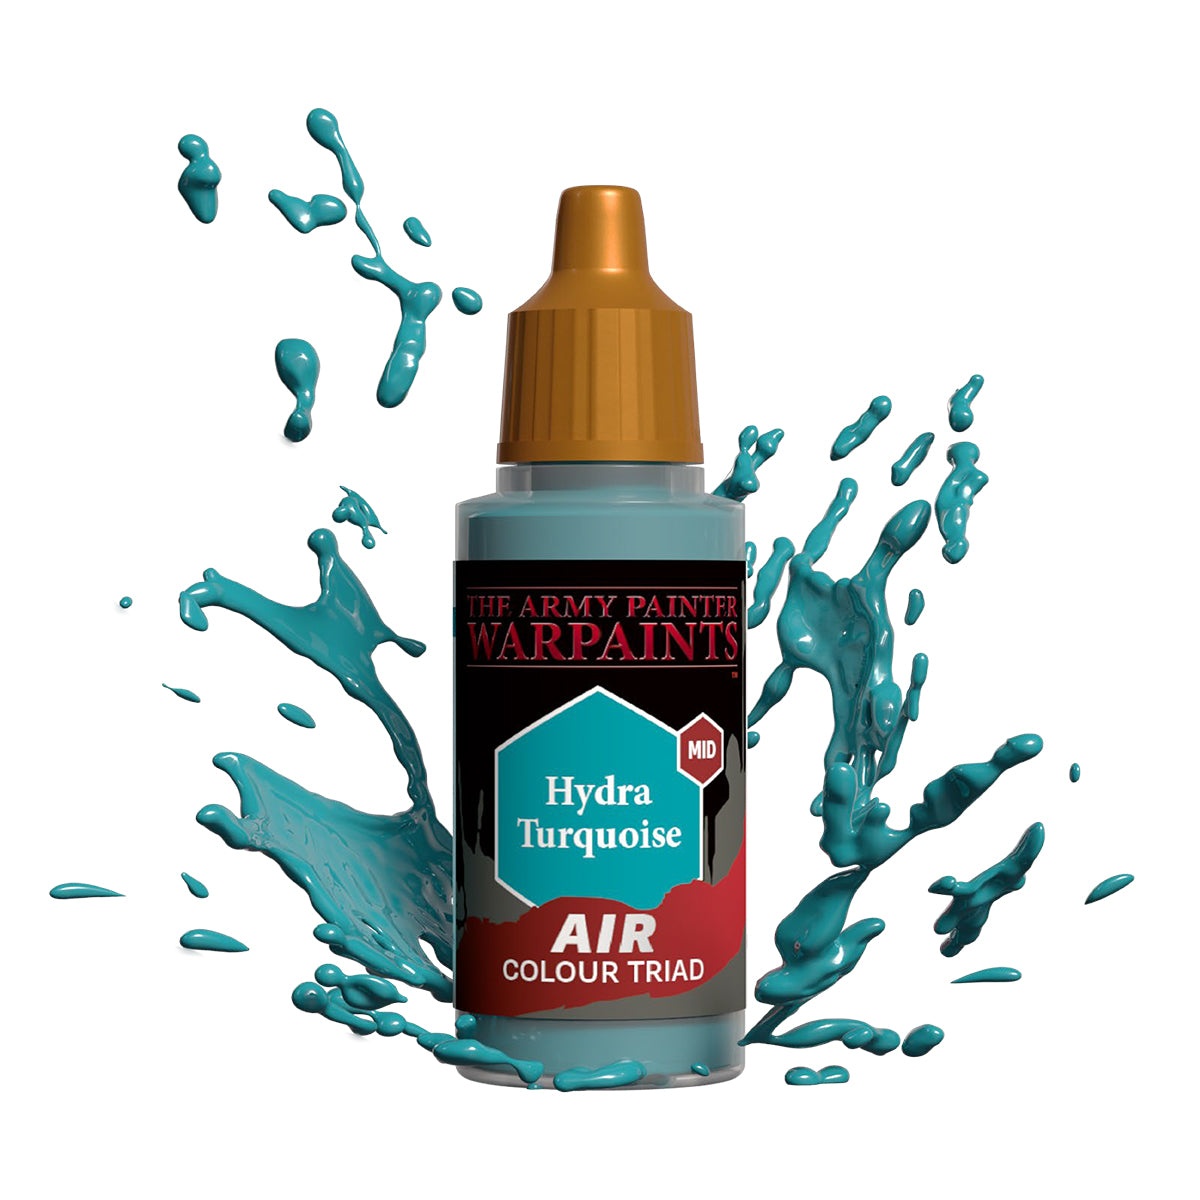 Warpaints Air: Hydra Turquoise